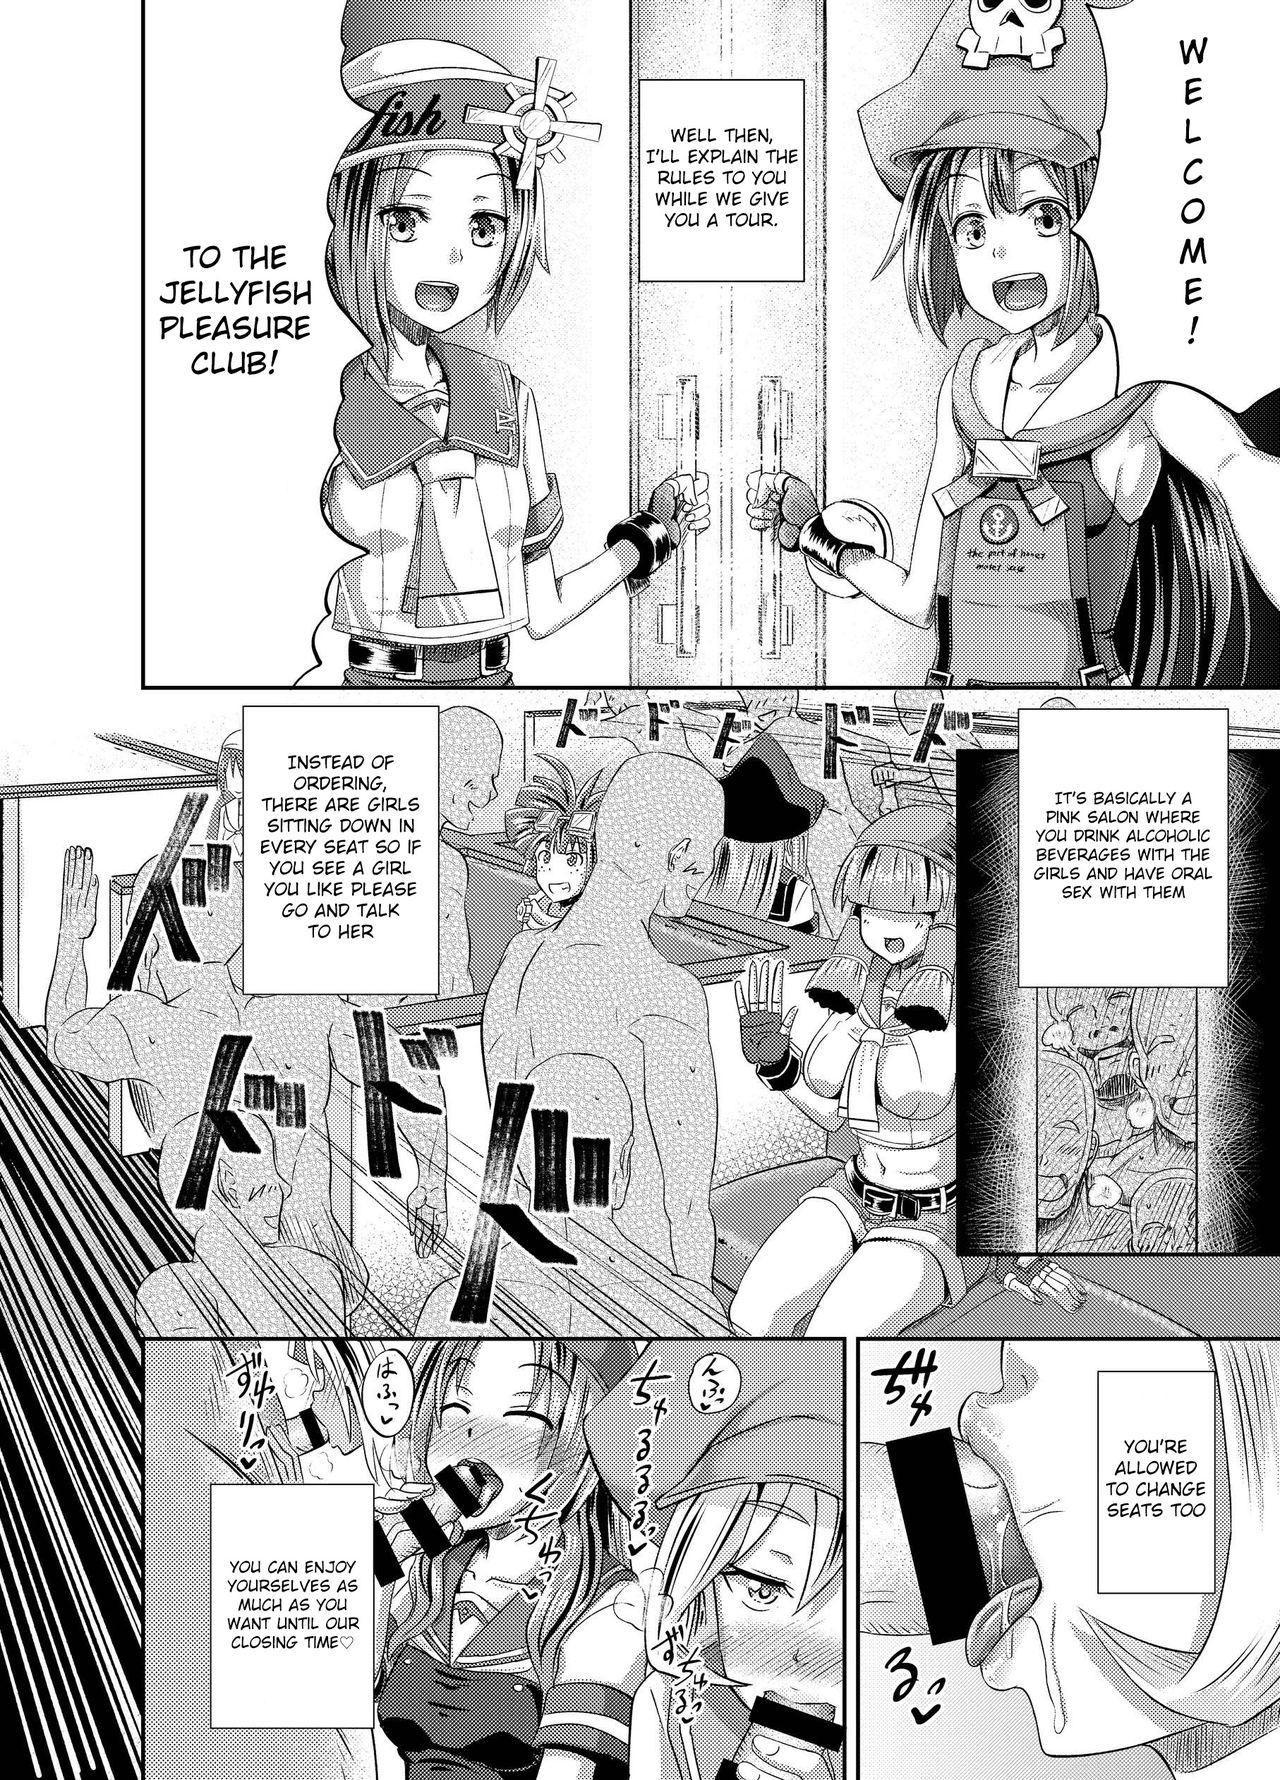 Telugu Jellyfish Kaizokudan e Youkoso! | Welcome to The Jellyfish Pleasure Club! - Guilty gear Sex Pussy - Page 3